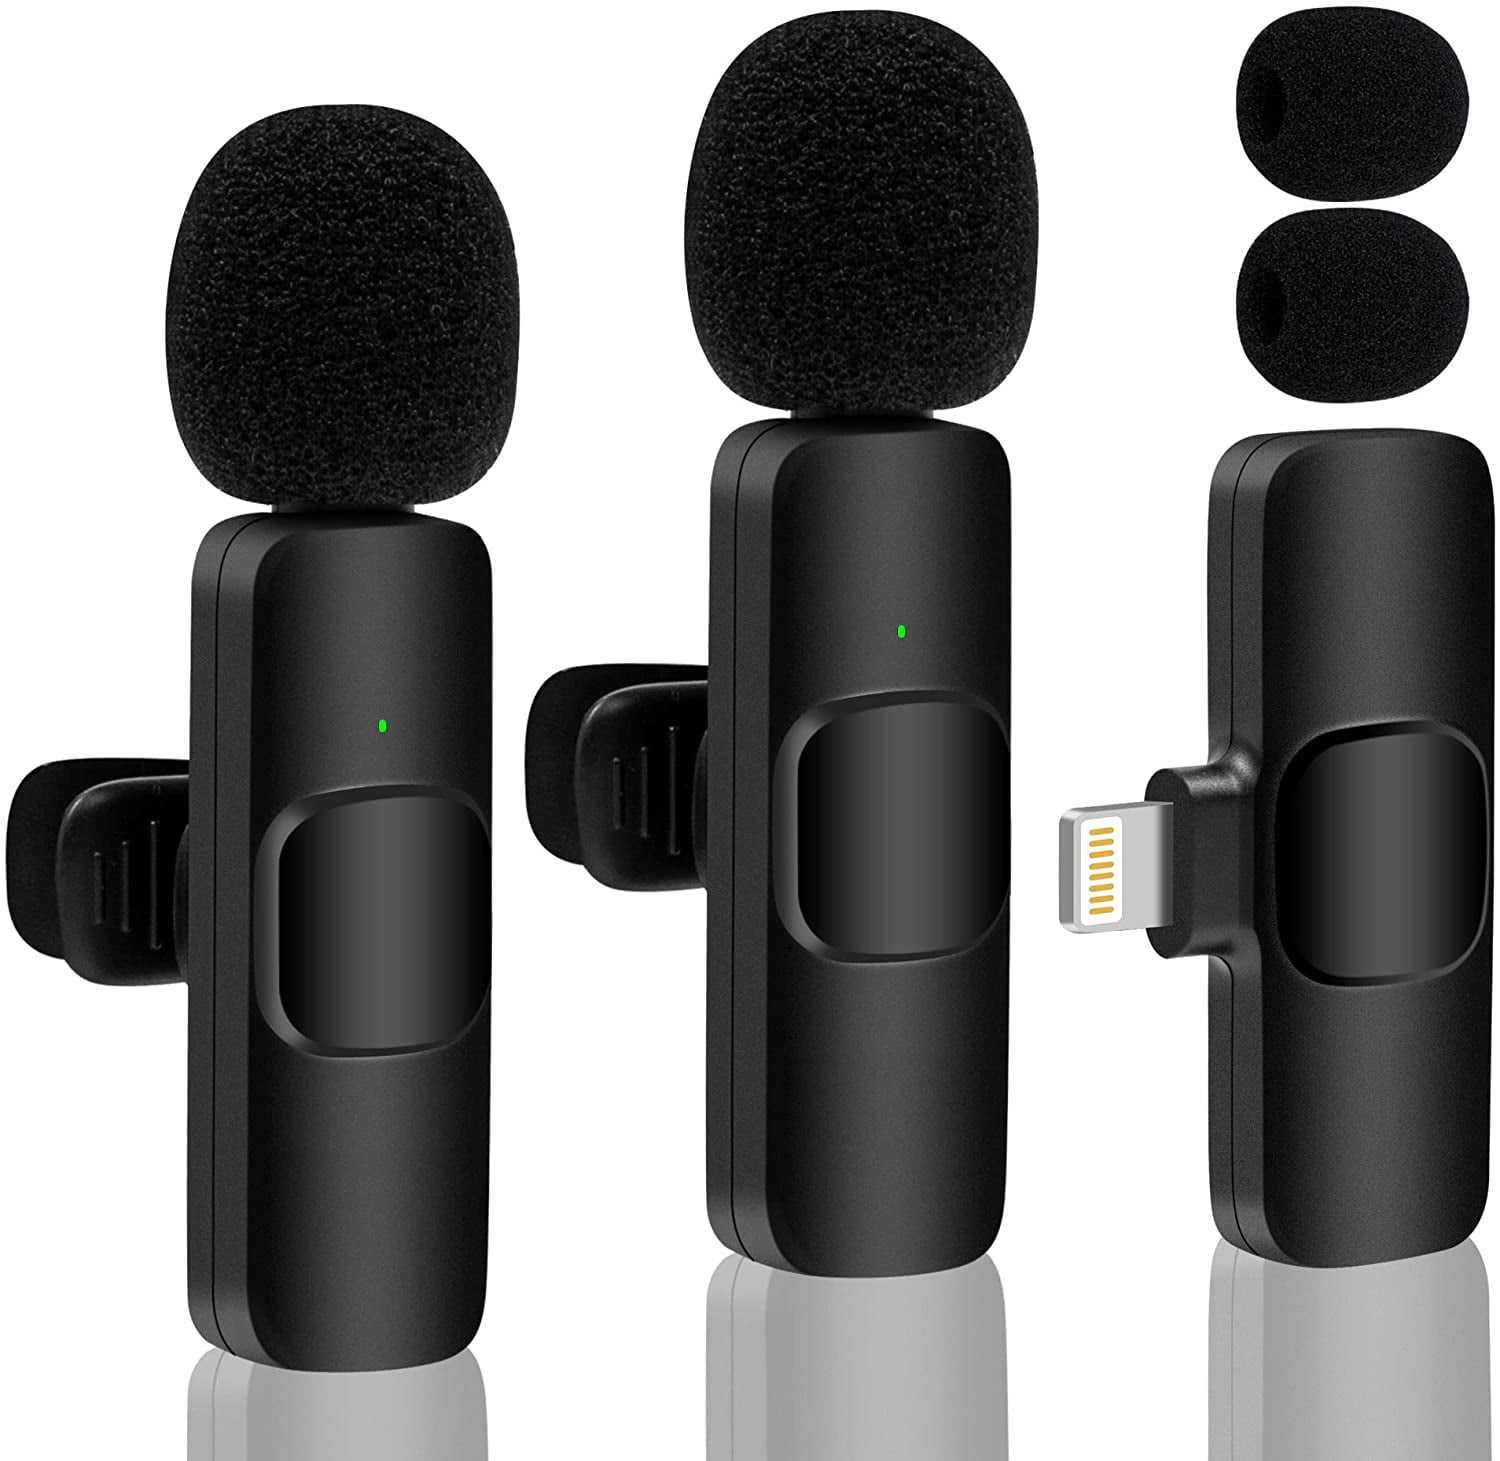 Vlog Interview Plug-Play Wireless Lavalier Mic with 2 Microphone for Phone Video Recording Wireless Microphone for iPhone iPad Auto Sync and Noise Reduction 